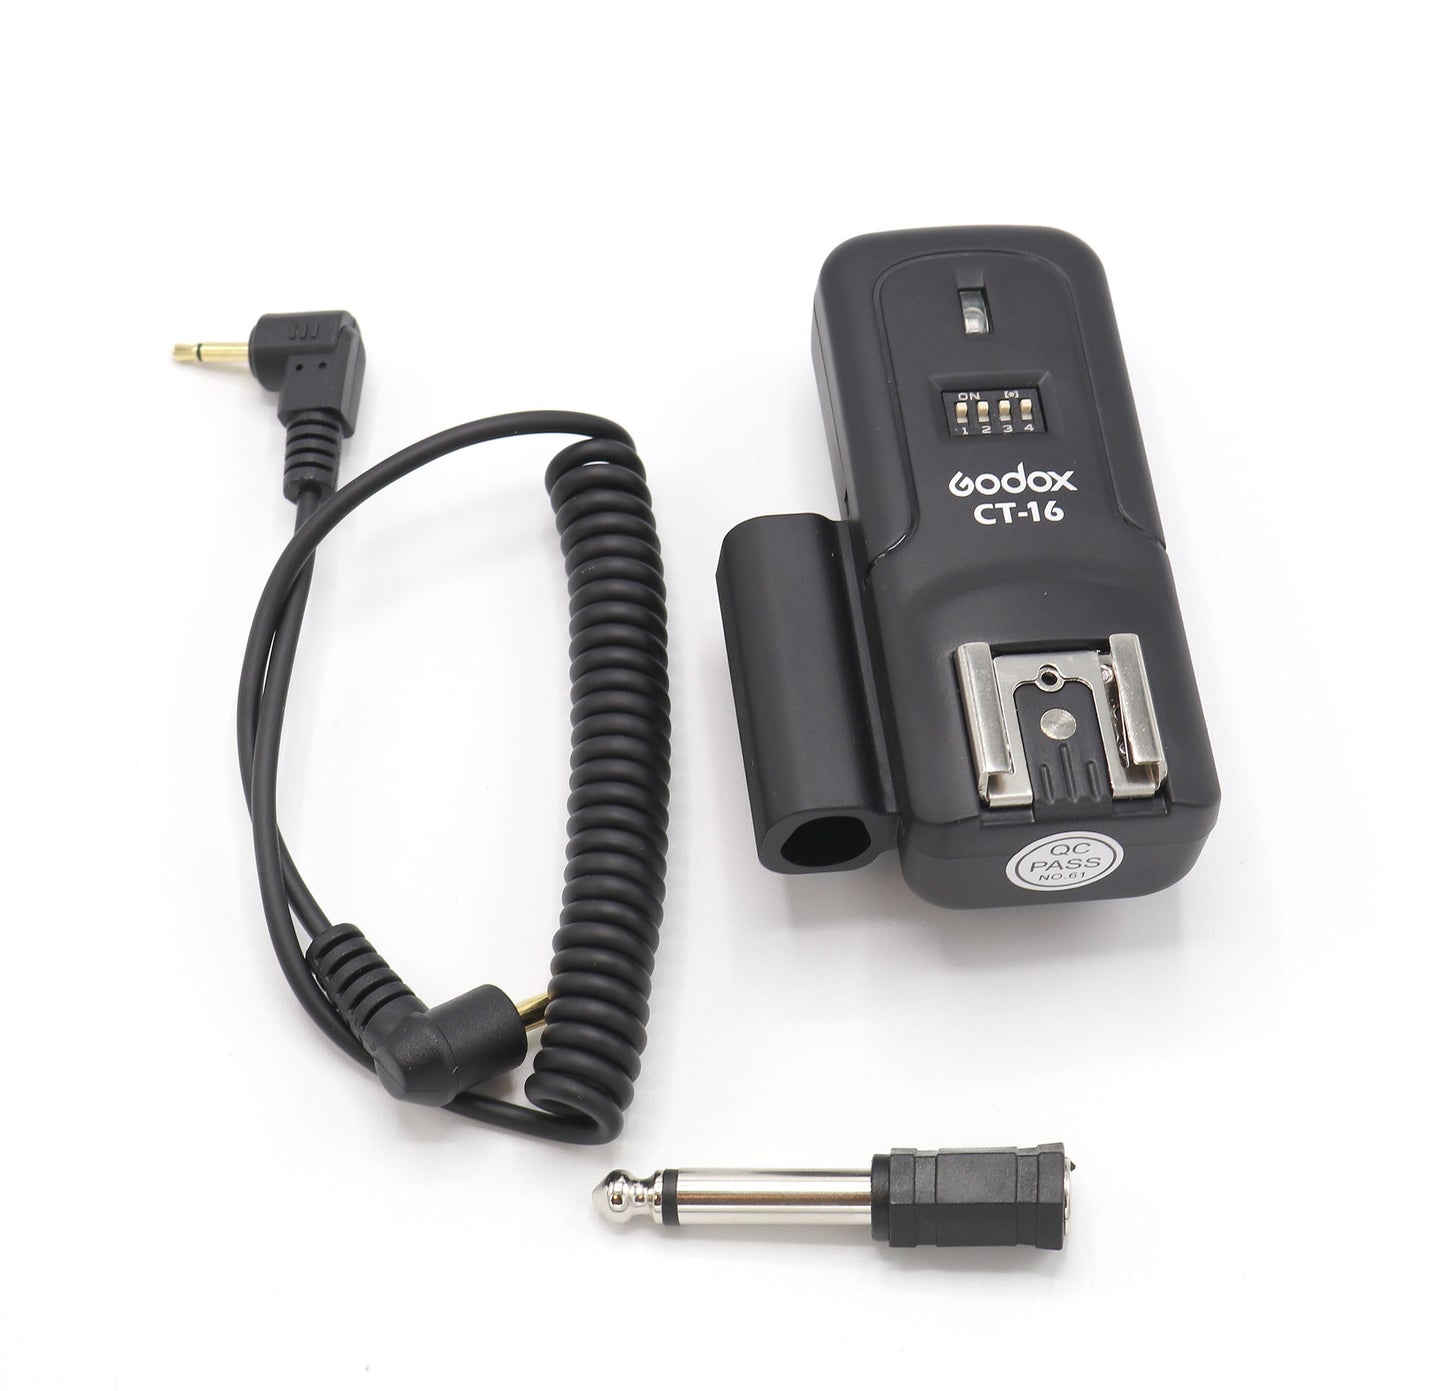 Godox CT-16 / CTR-16 Wireless 16-Channels Radio Flash Trigger Transmitter and Receiver for Studio and Lighting Equipment (Available in Set and Receiver Only)